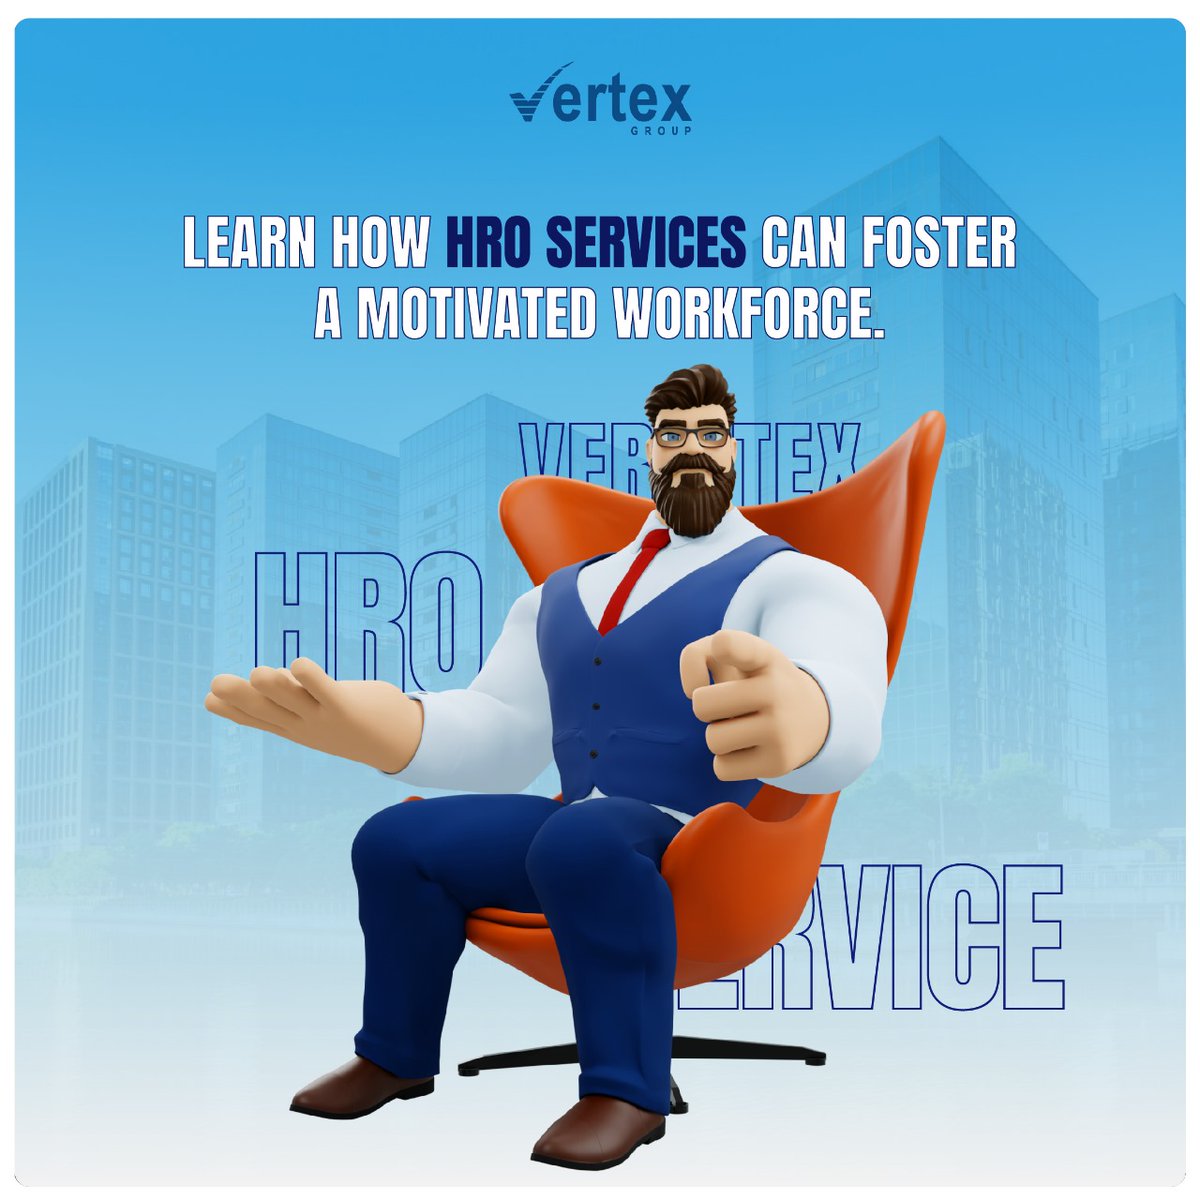 Unlock the secret to a motivated workforce with HRO expertise. Learn how Vertex Group's Human Resources Outsourcing can fuel motivation, drive performance, and elevate your team's success. #HRInnovation #MotivatedWorkforce #VertexHRO